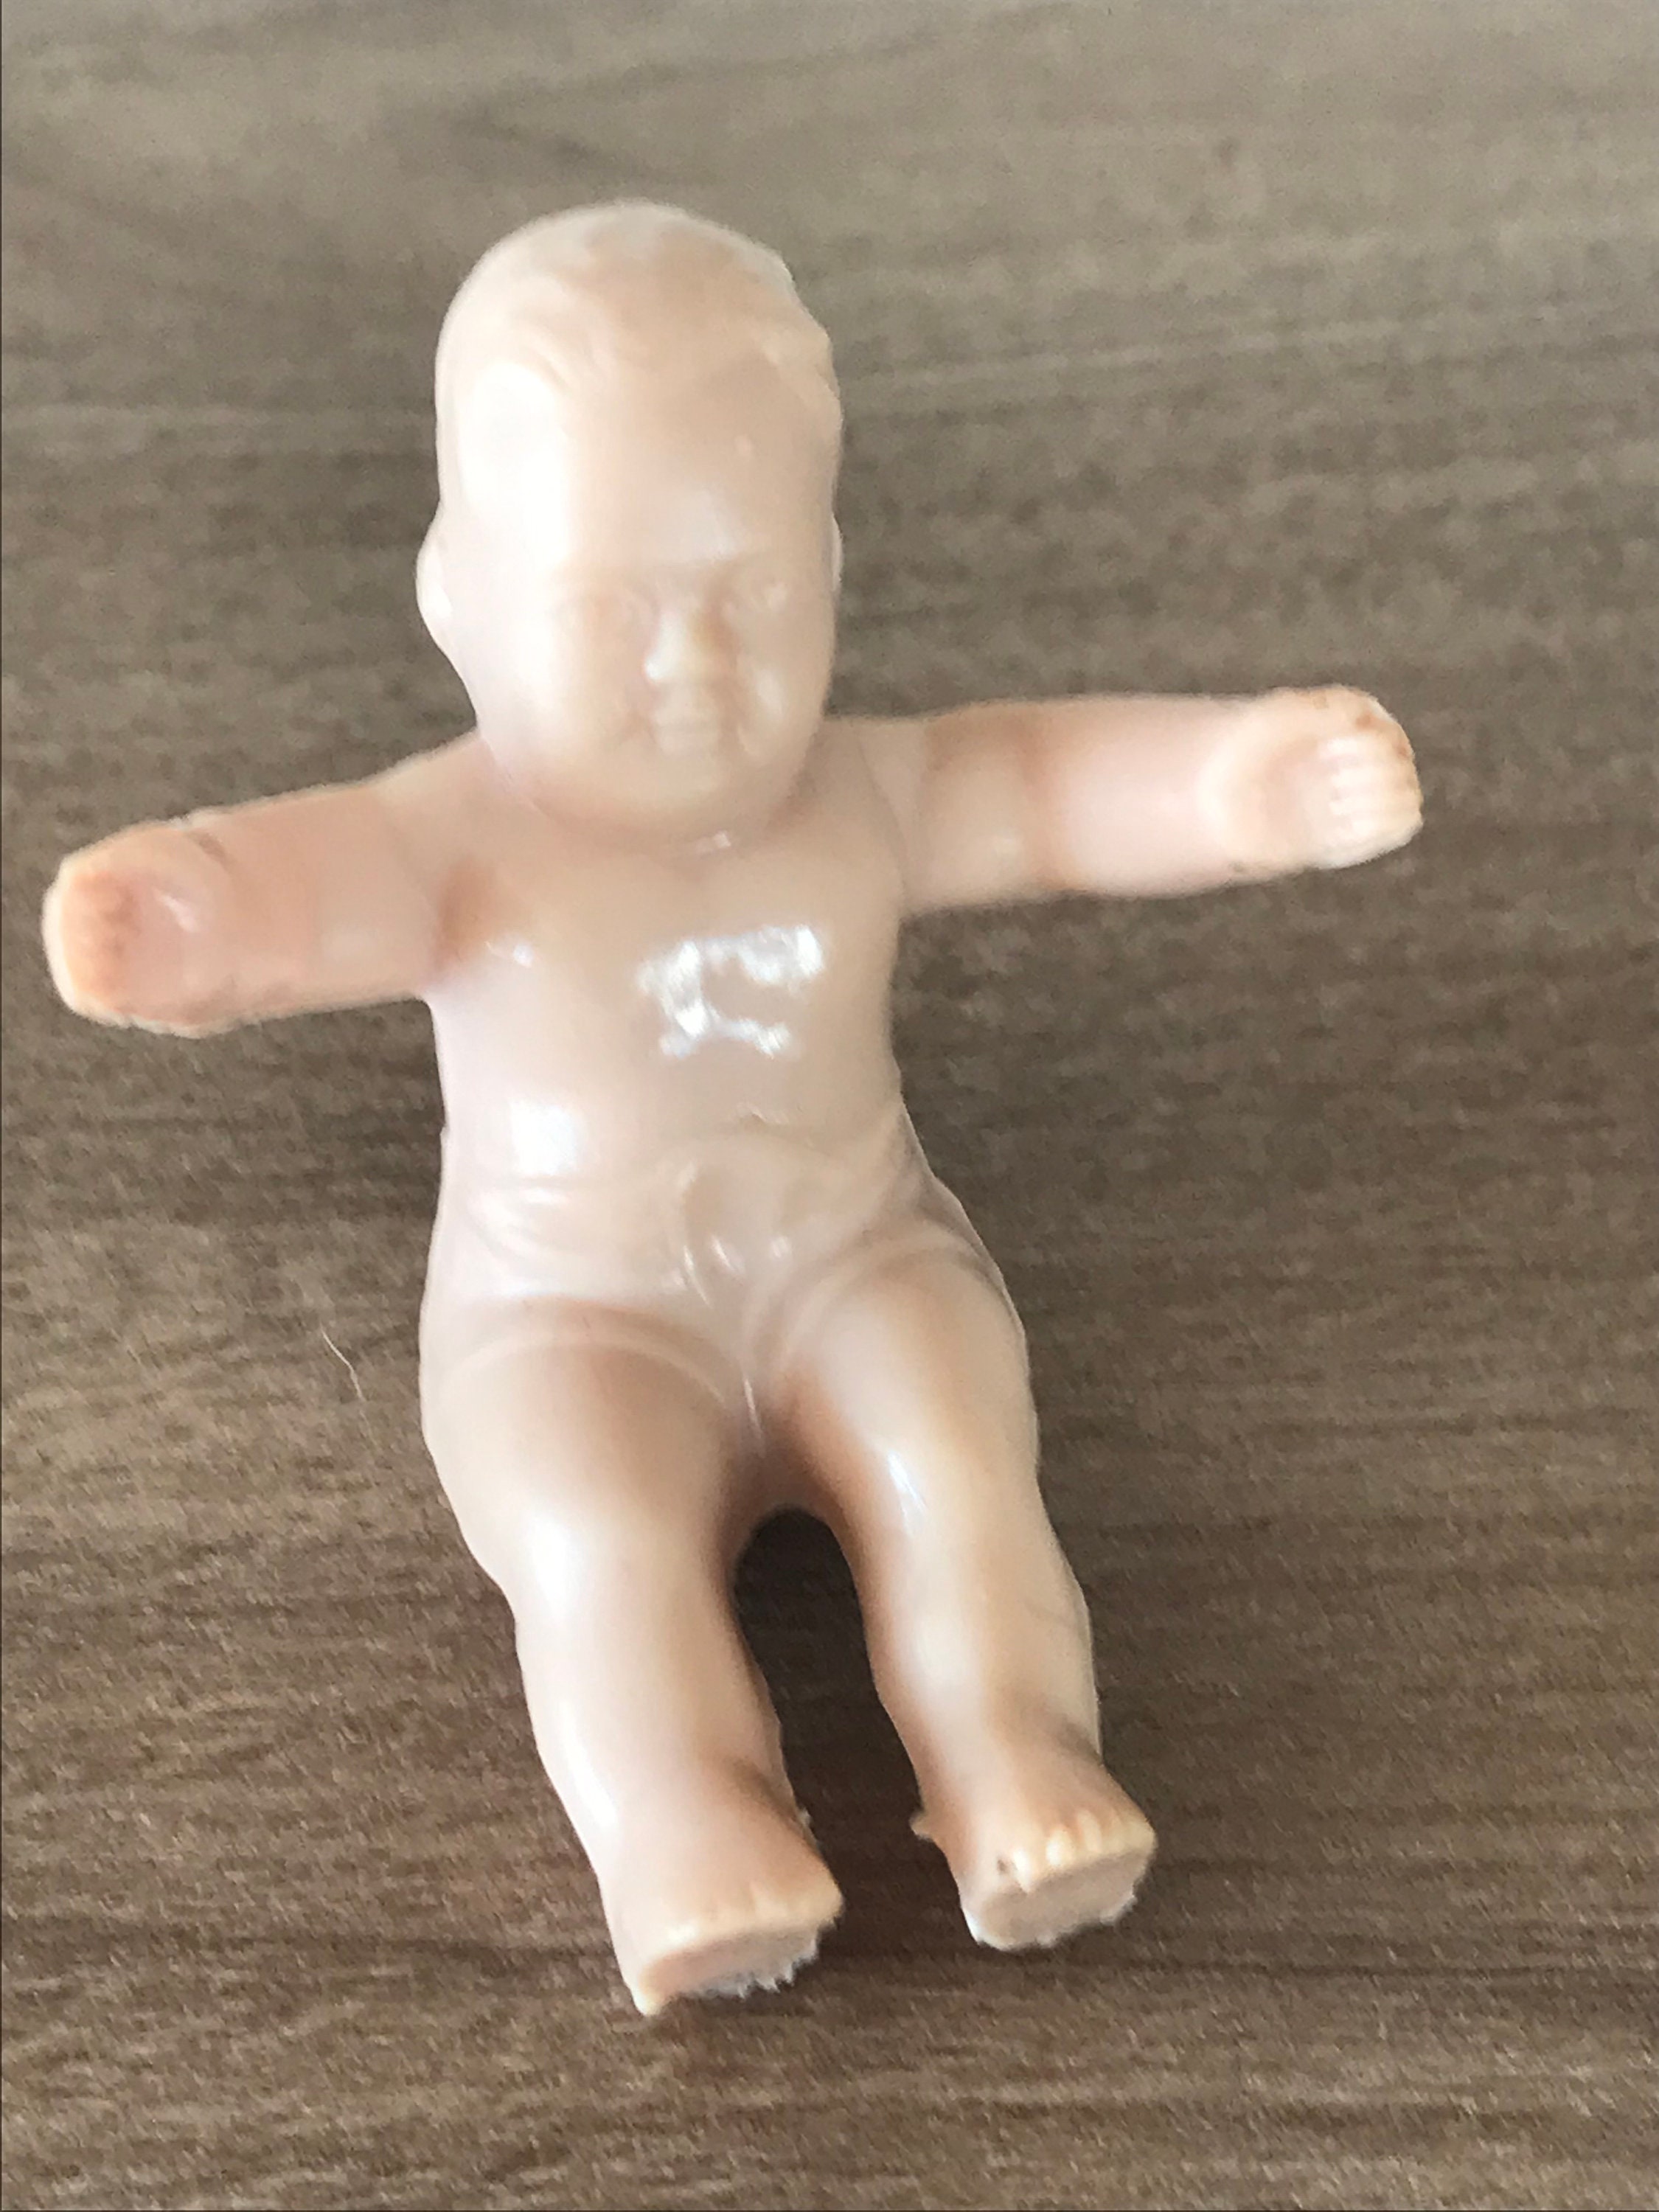 Small Vintage Soft Plastic/rubber Kleeware Sitting Baby Doll 1950s -   Hong Kong